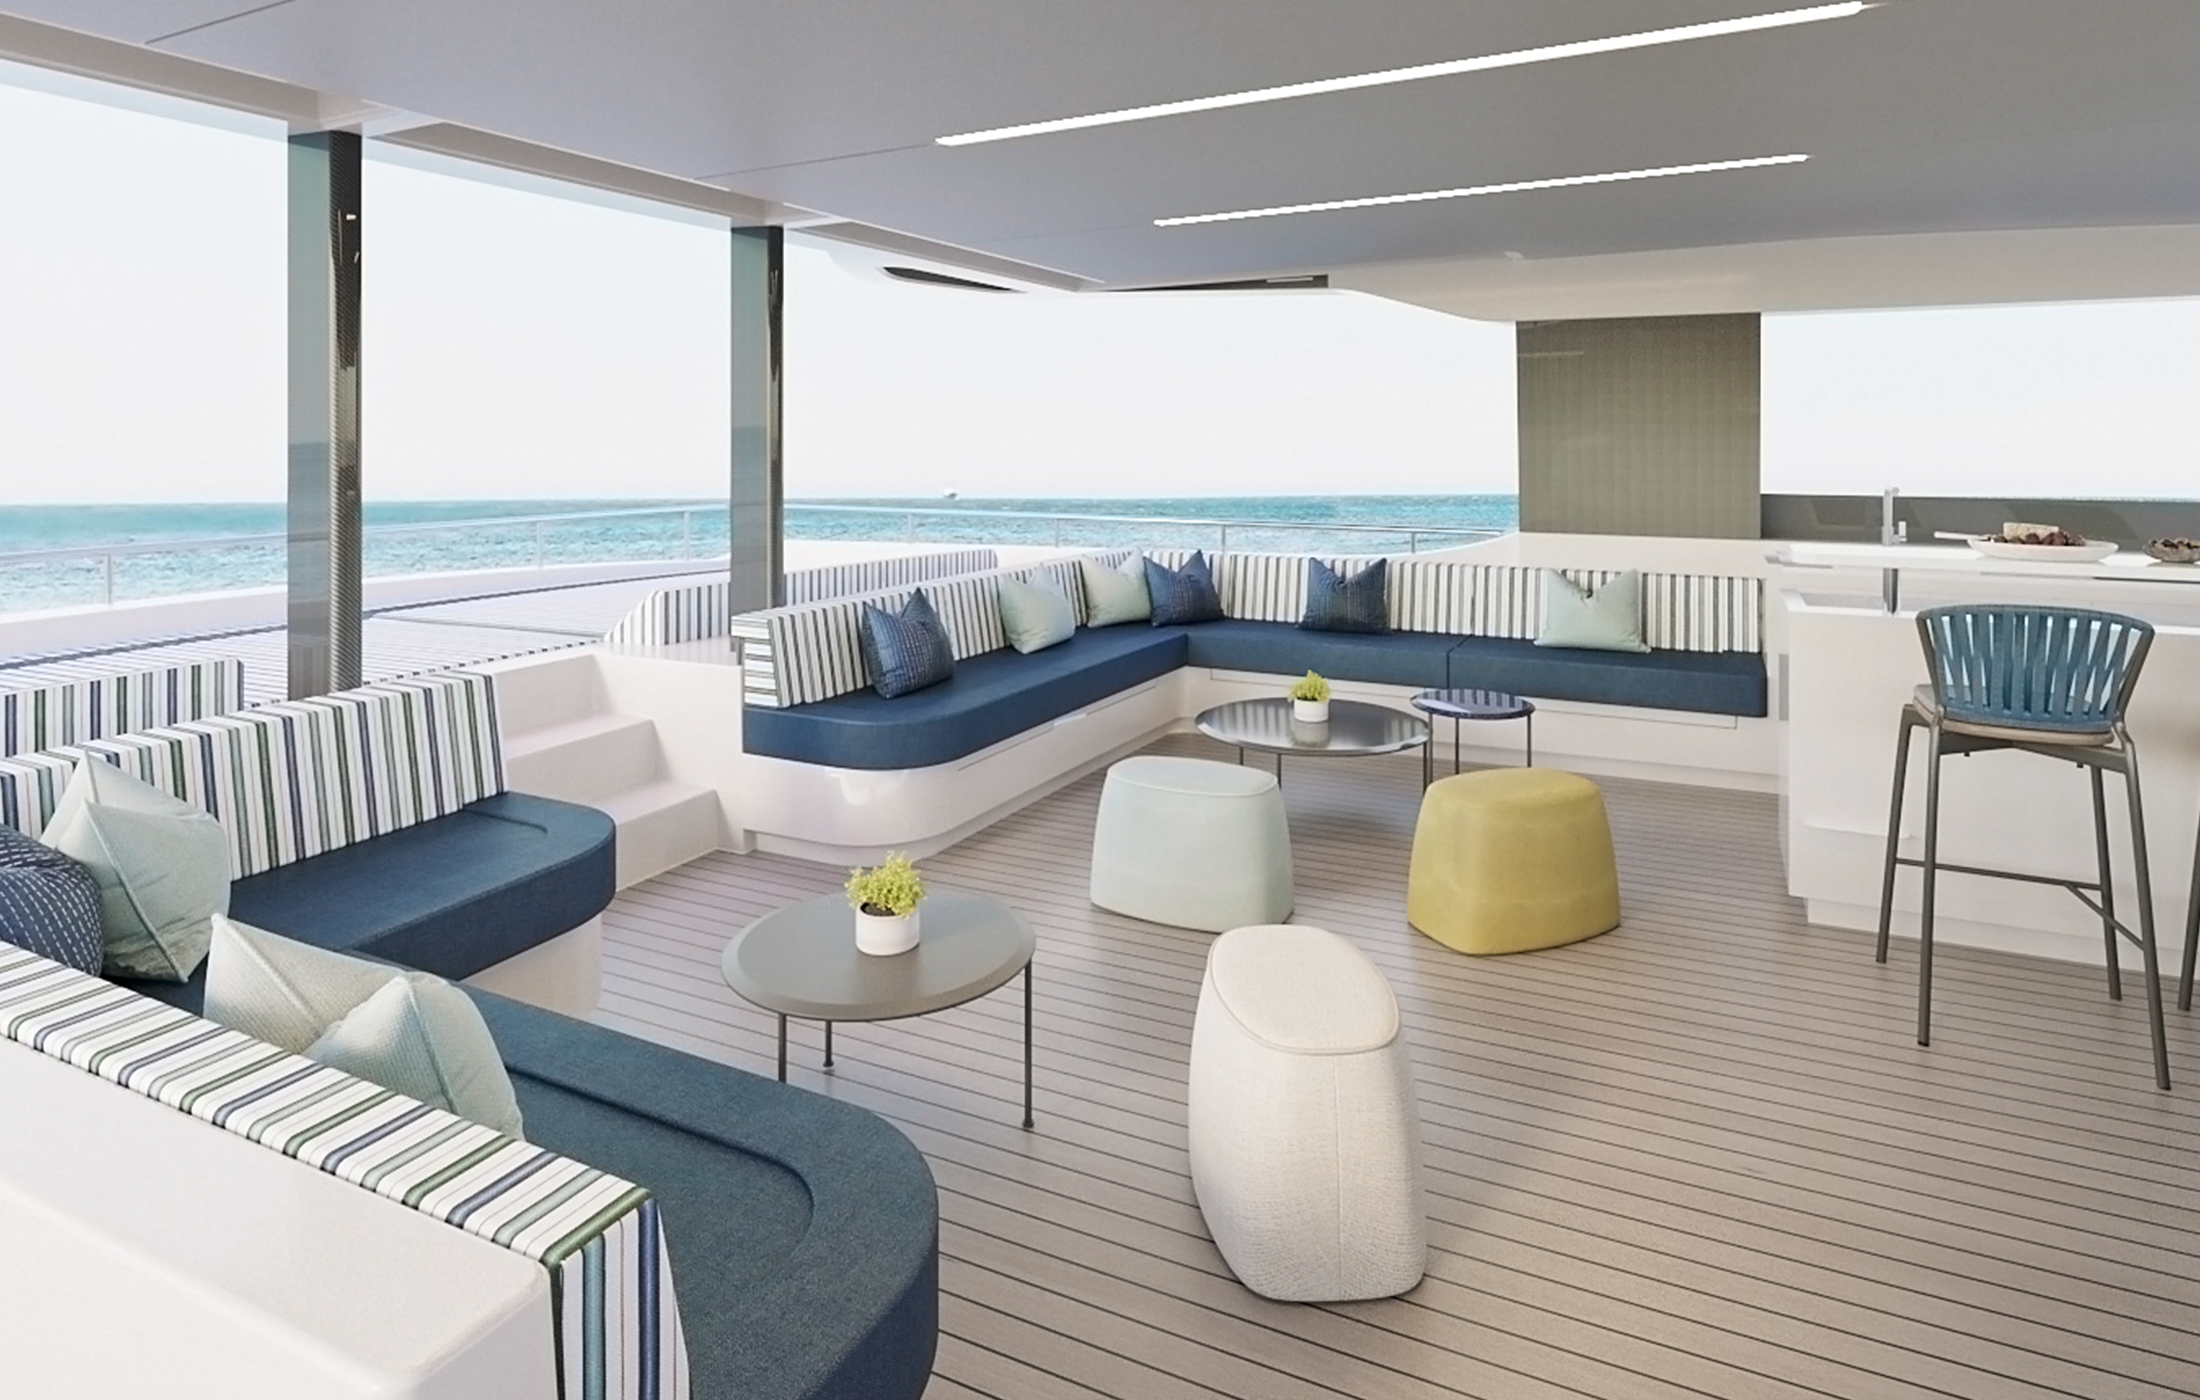 interior of the open deck of a yacht